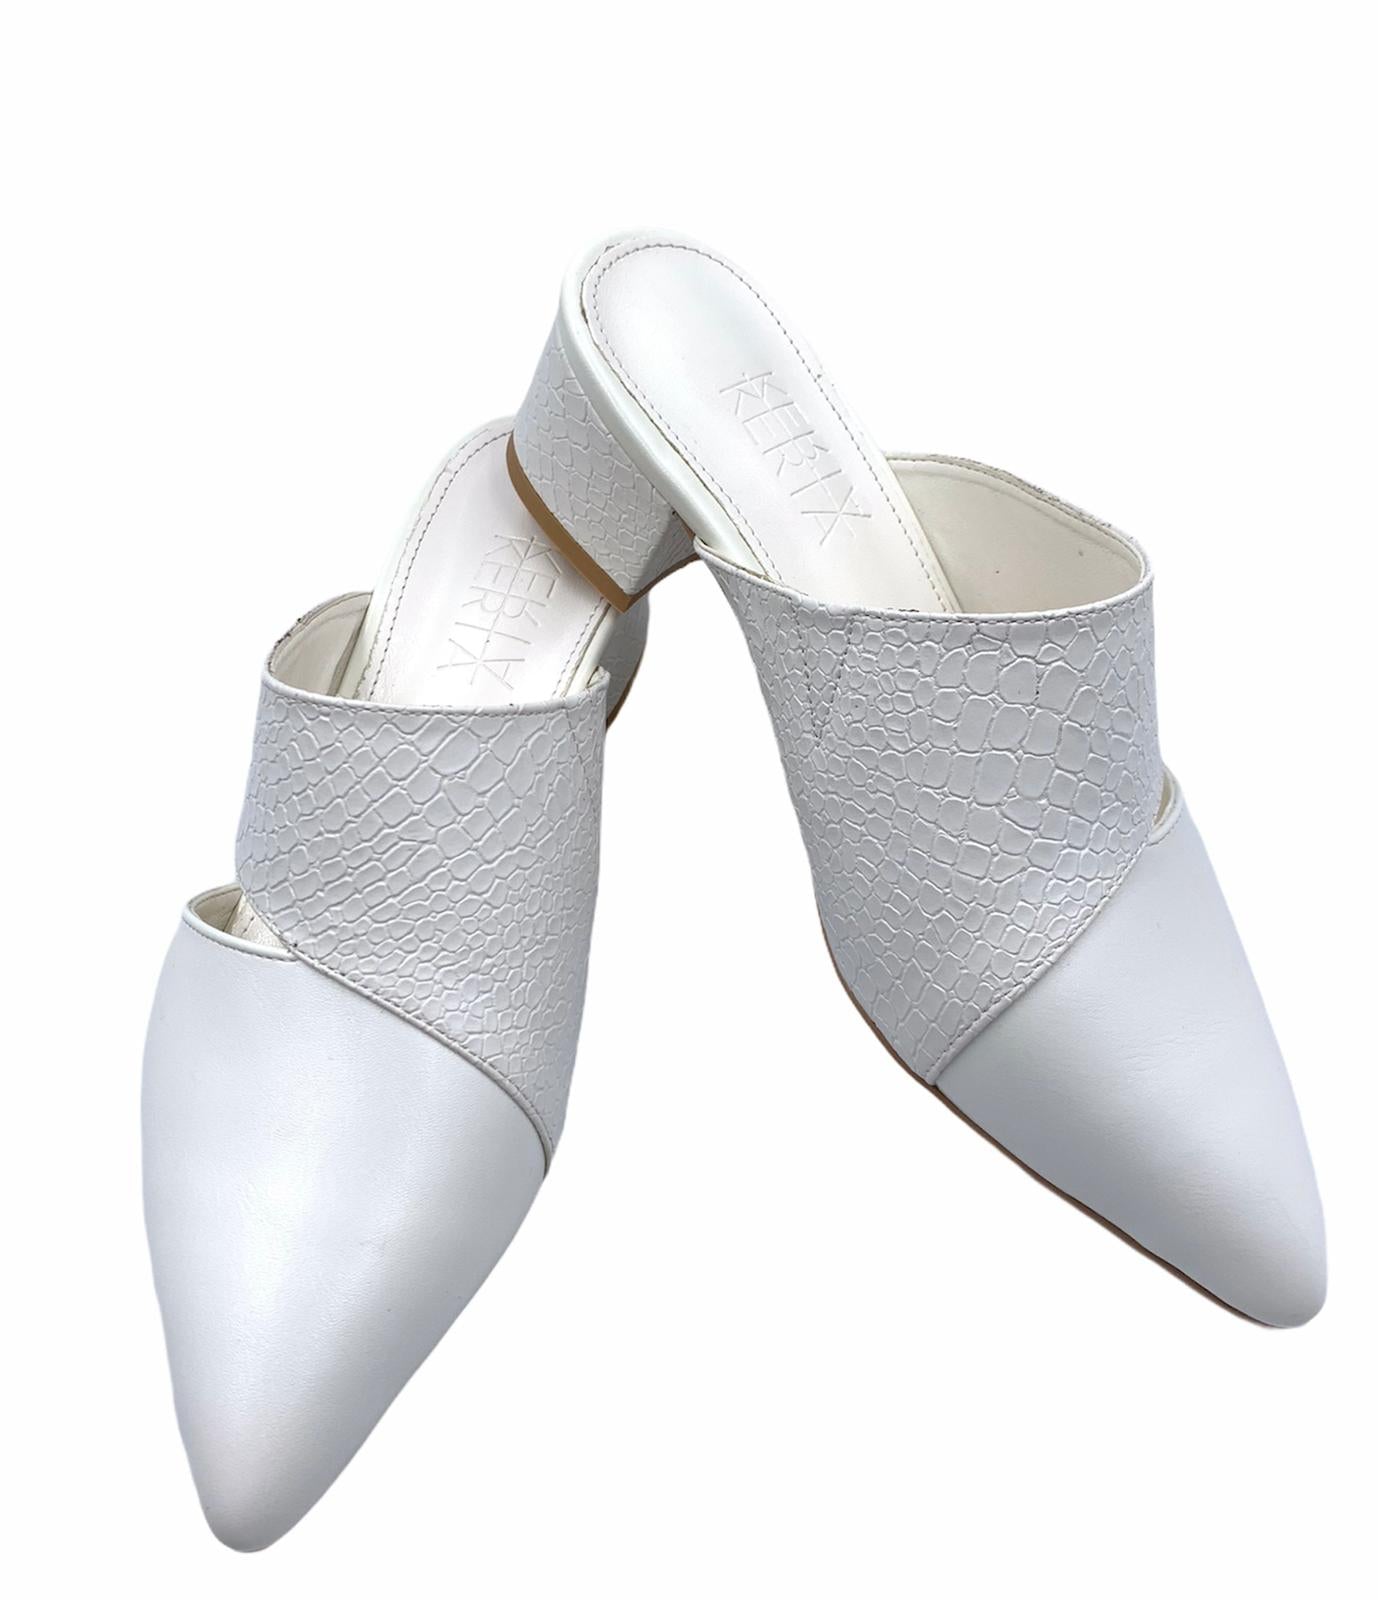 Half White Snakeskin Leather Shoes with Cut Out effect